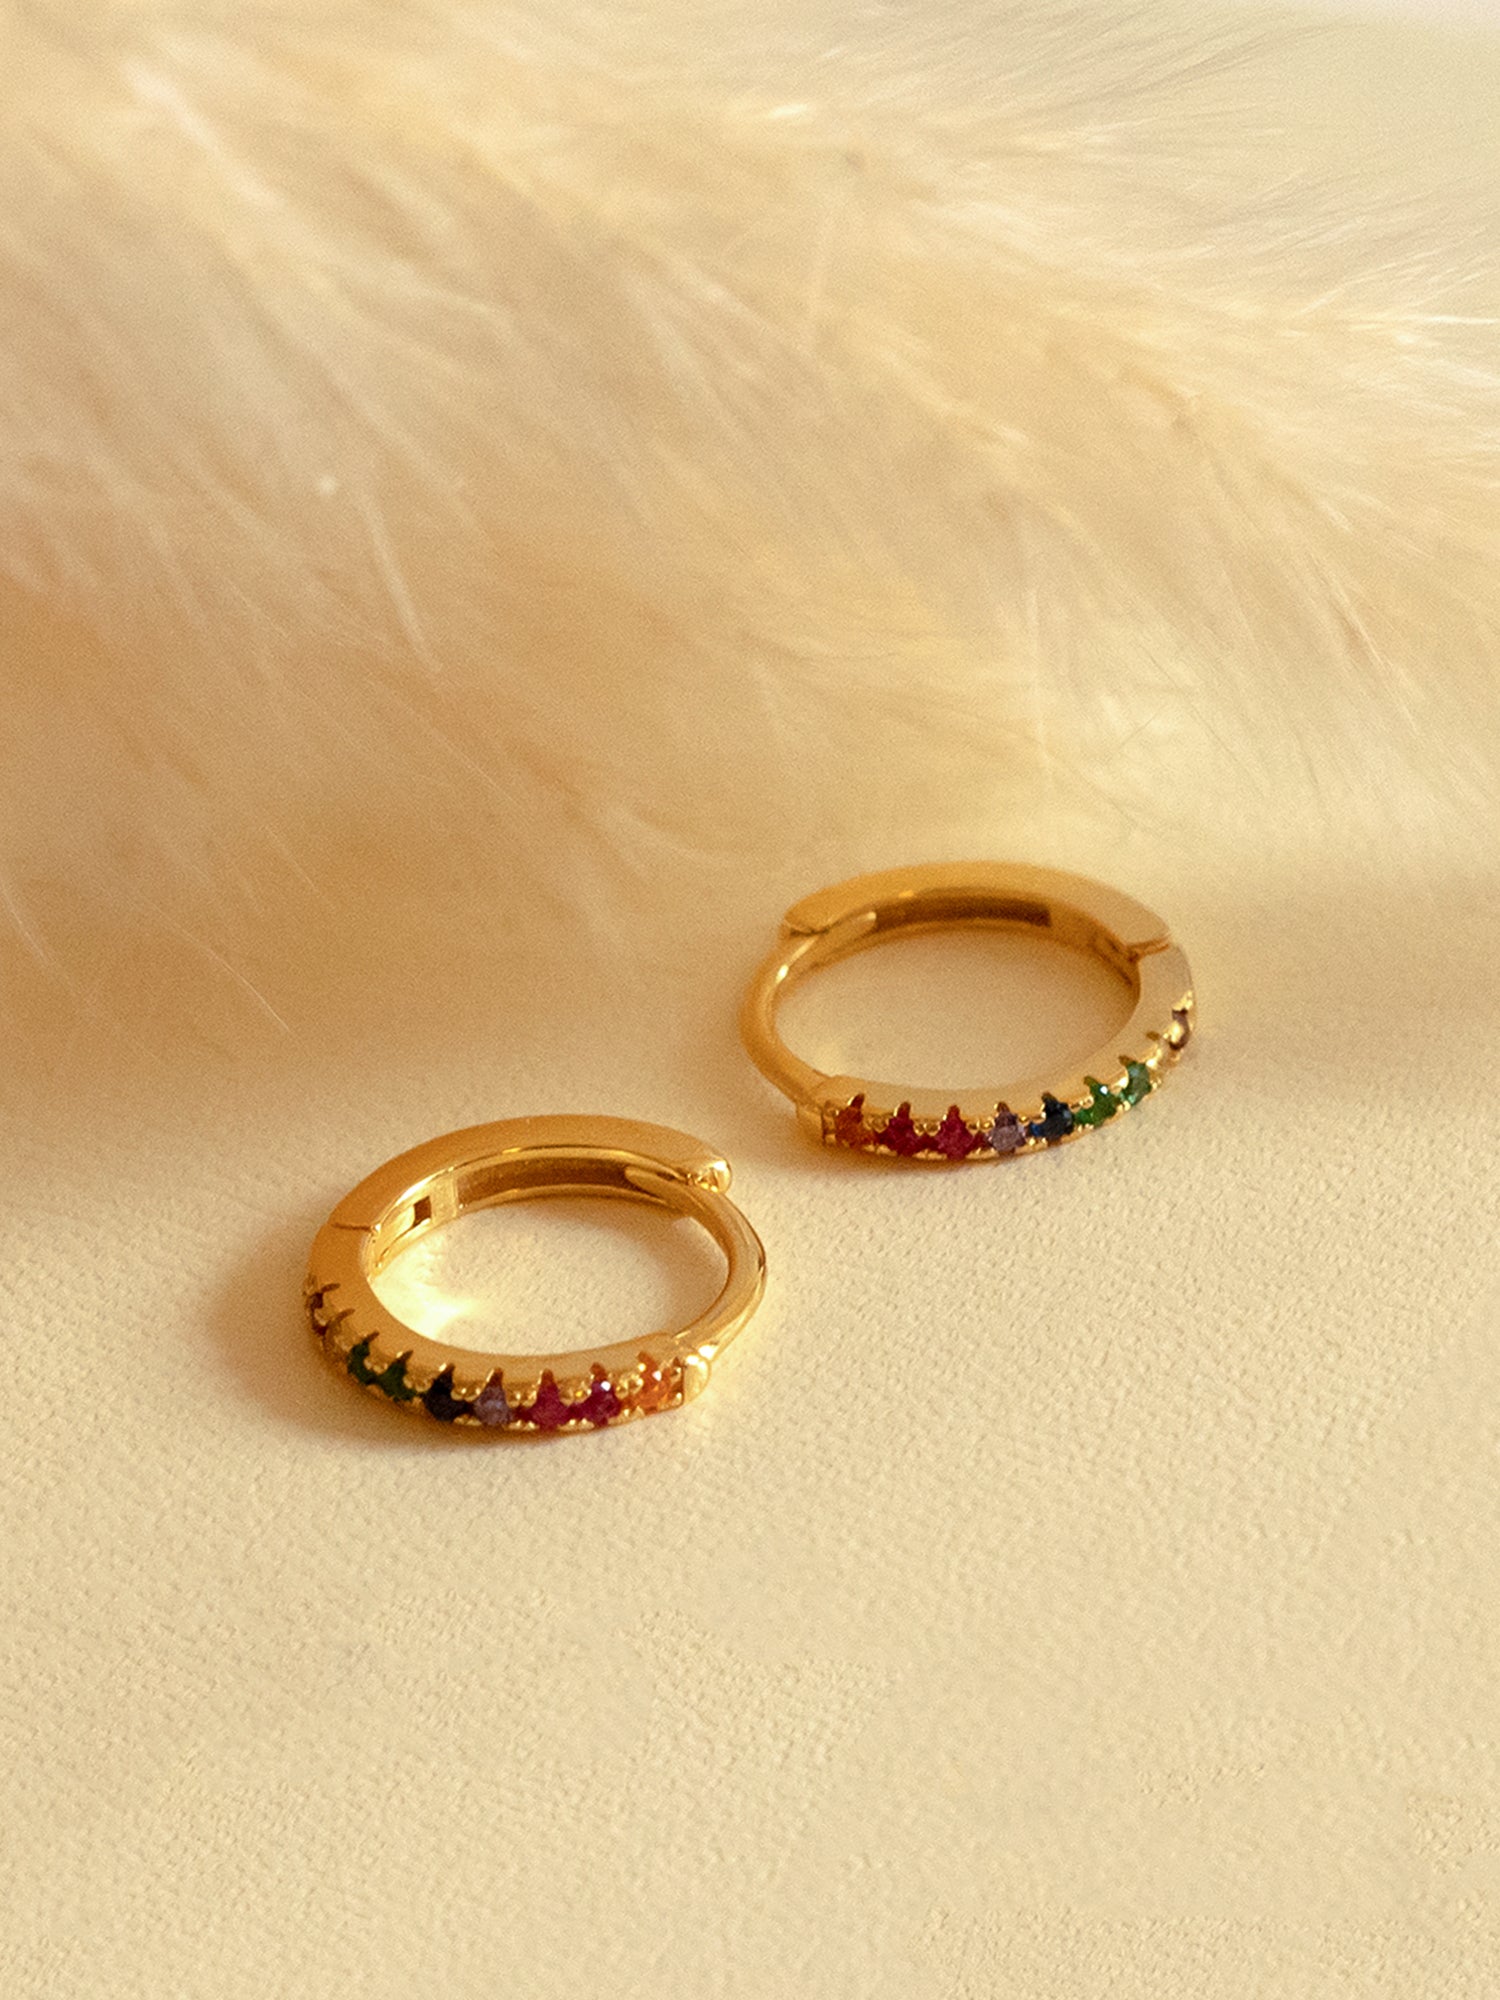 Gold Small Hoop Earrings With Colourful Stones